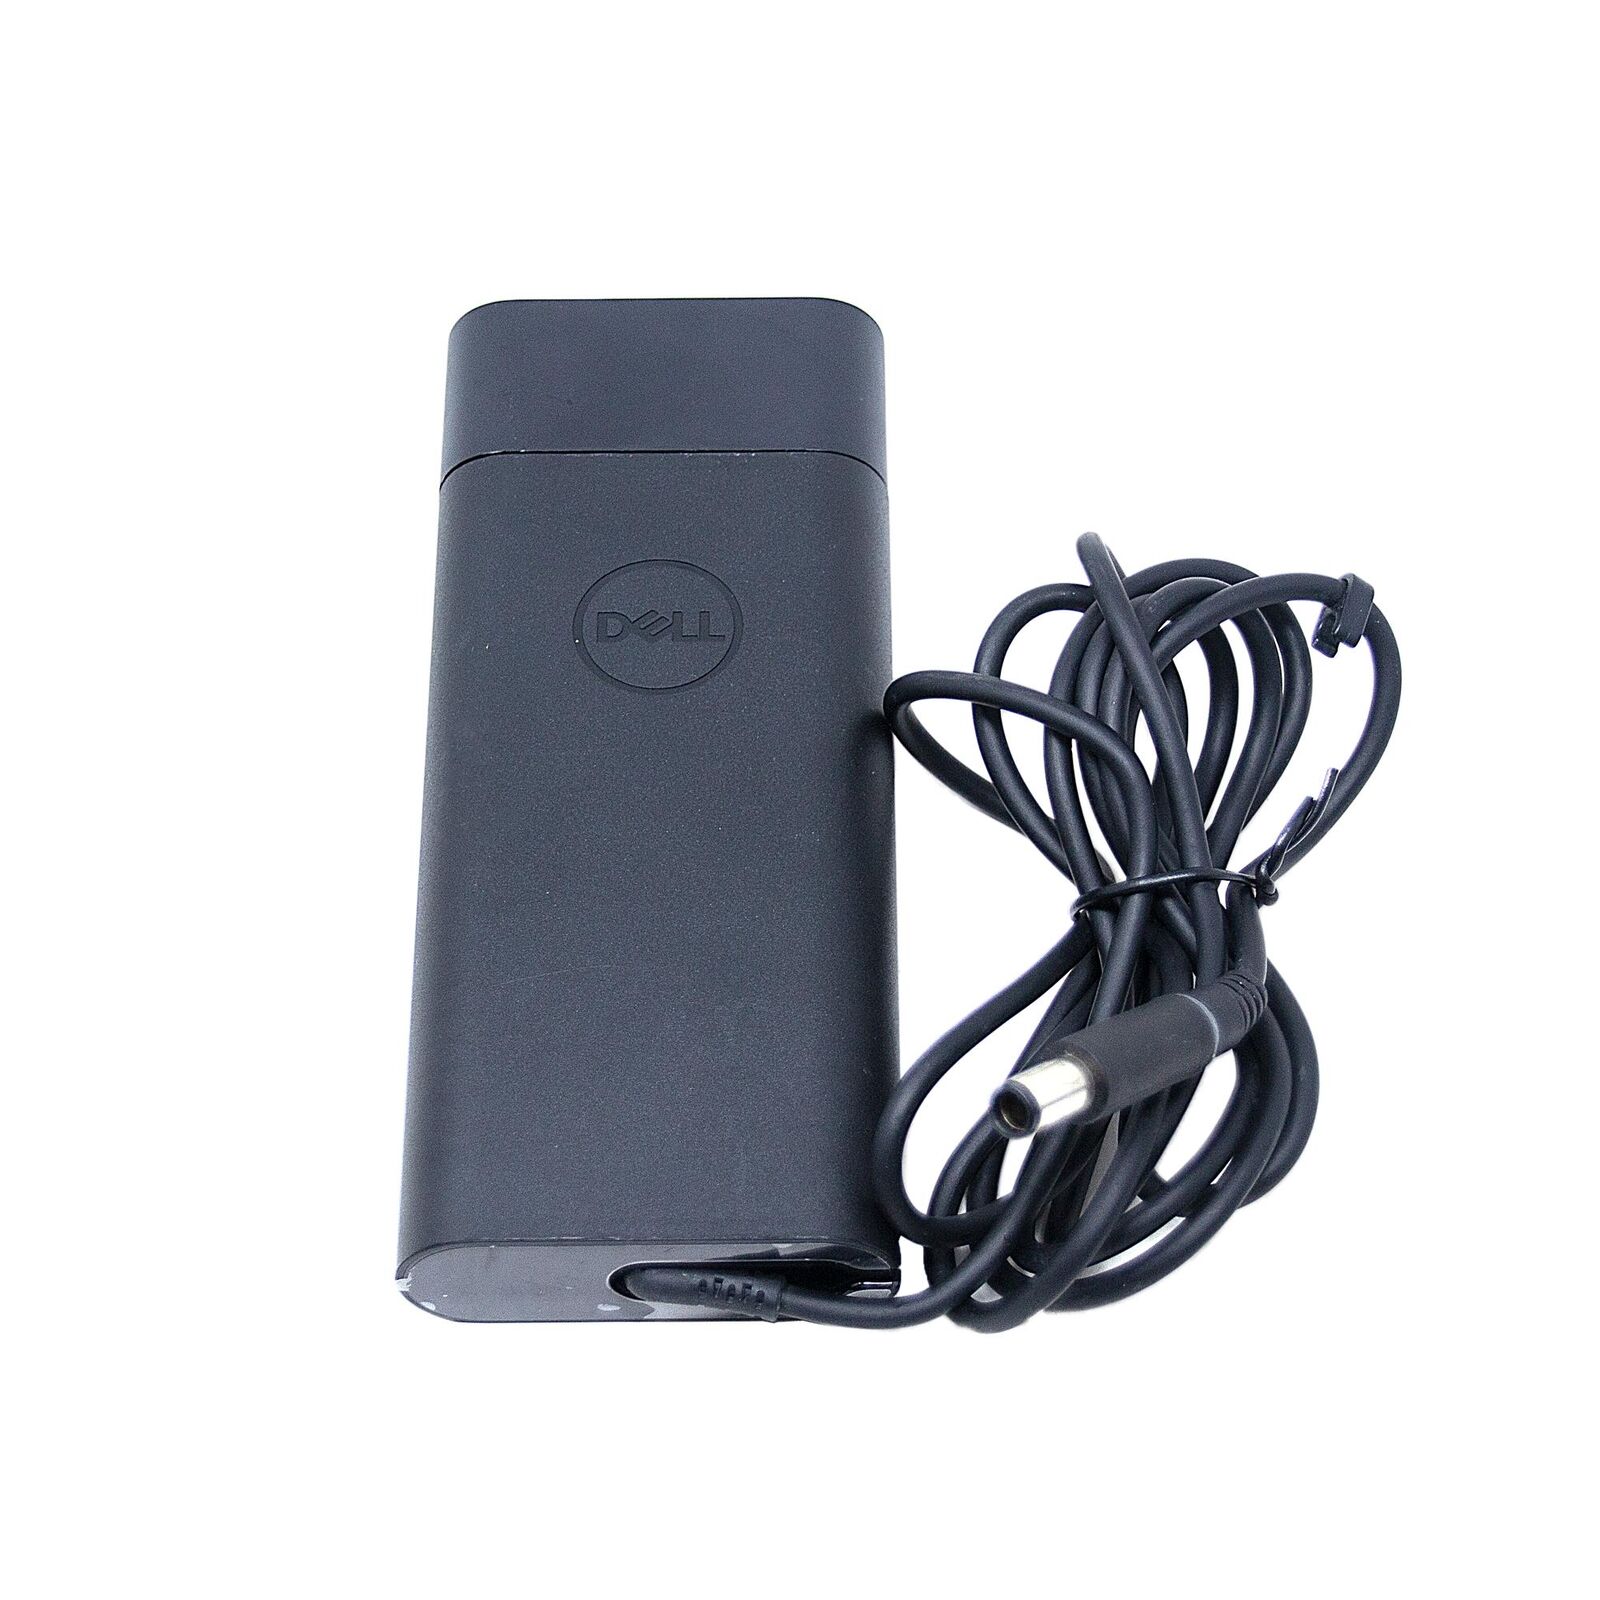 DELL Latitude D630 PP24L 90W Genuine Original AC Power Adapter Charger